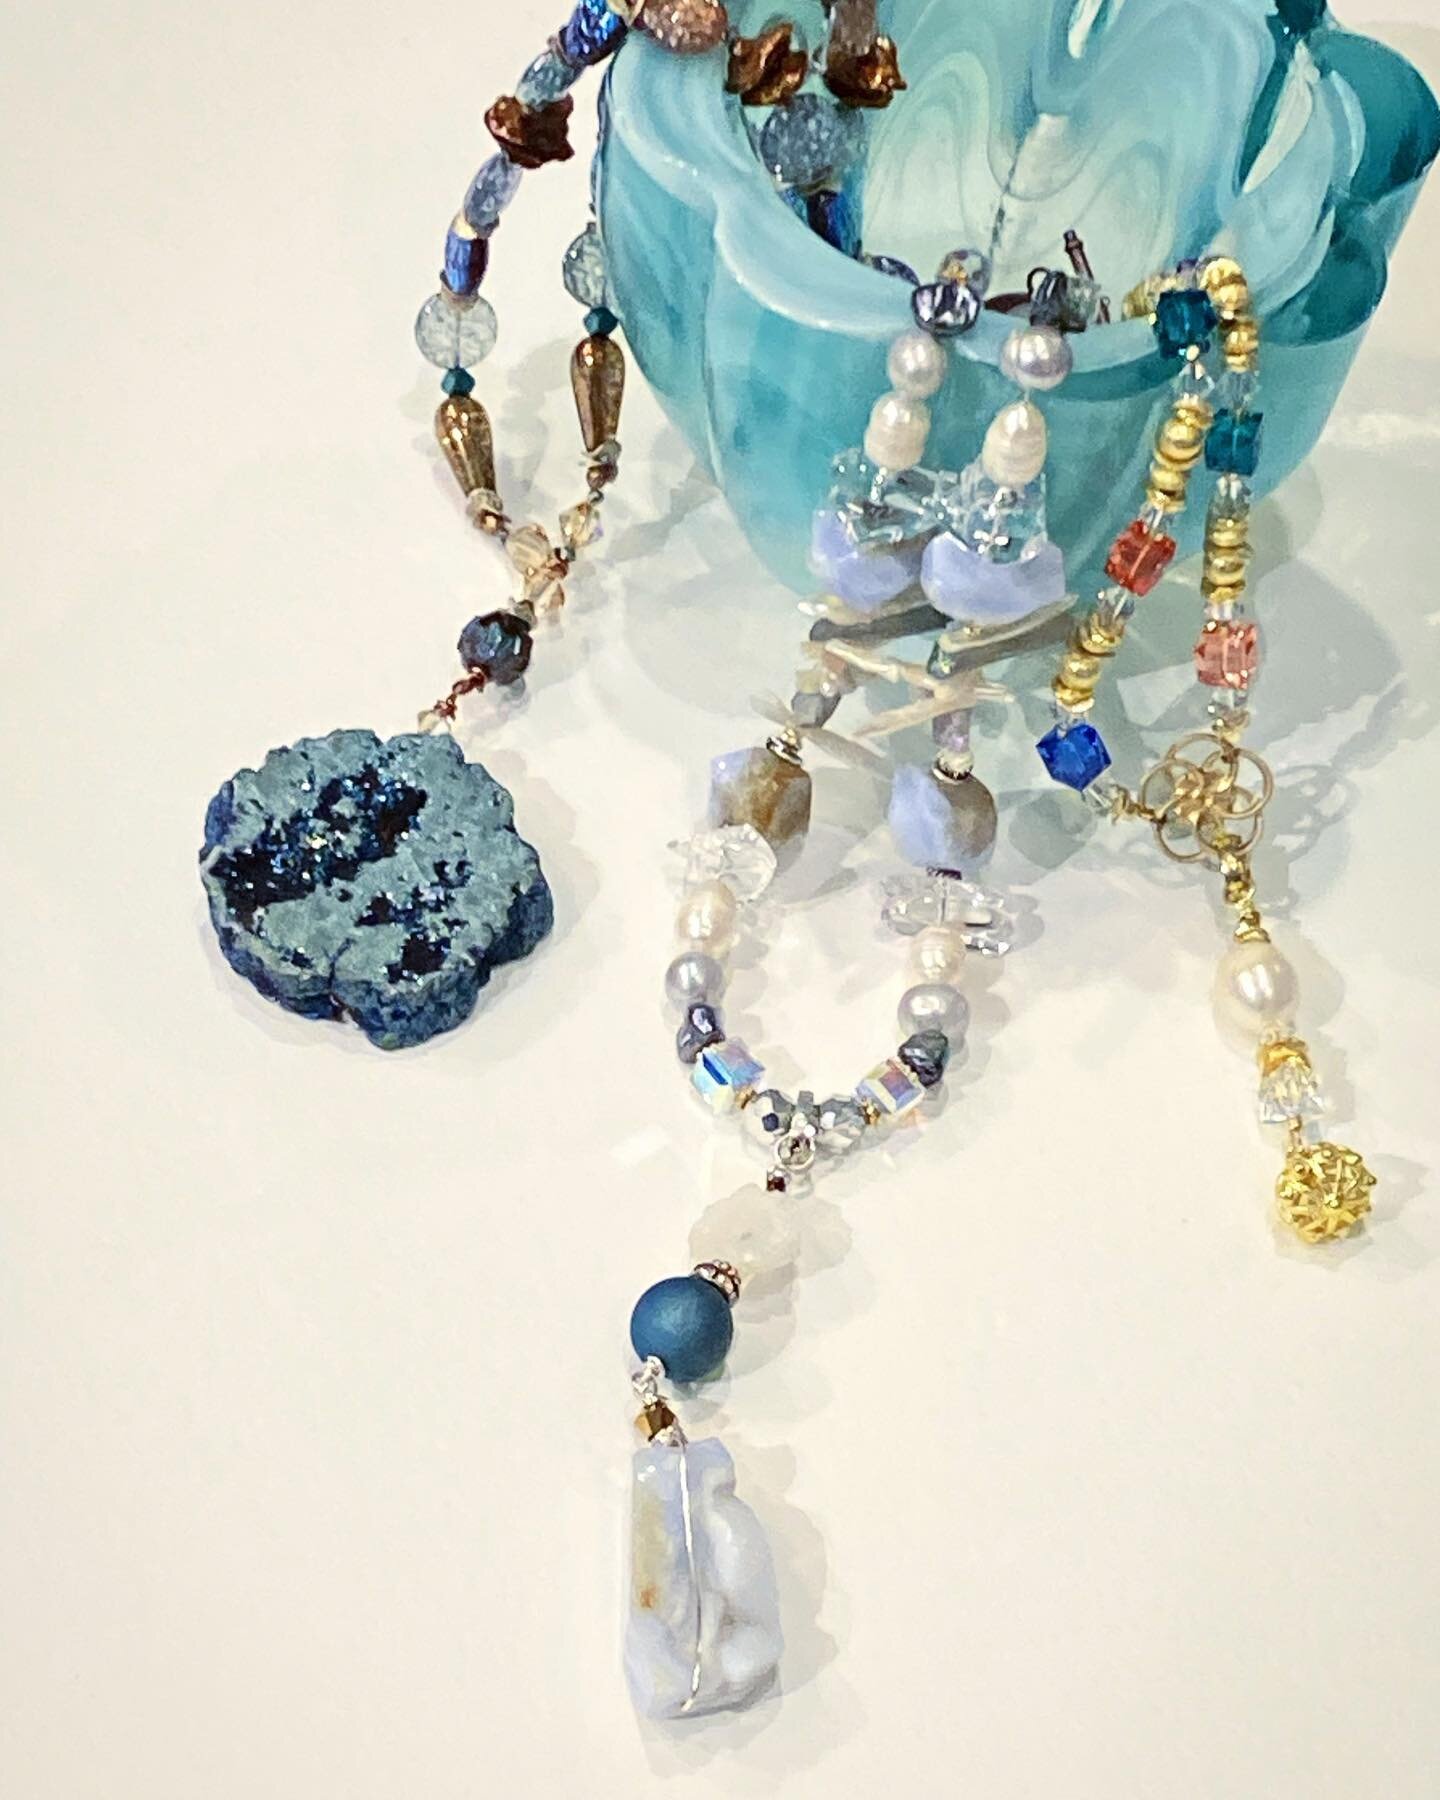 Shops at Mariana&rsquo;s this Thursday, Friday, and Saturday for a 20% special and free gift with purchase of $75 or more in the Boutique! Pick up a SuSu Jewelry piece as a unique beaded gift as Susan will be set up all three days of the event! 
 
36